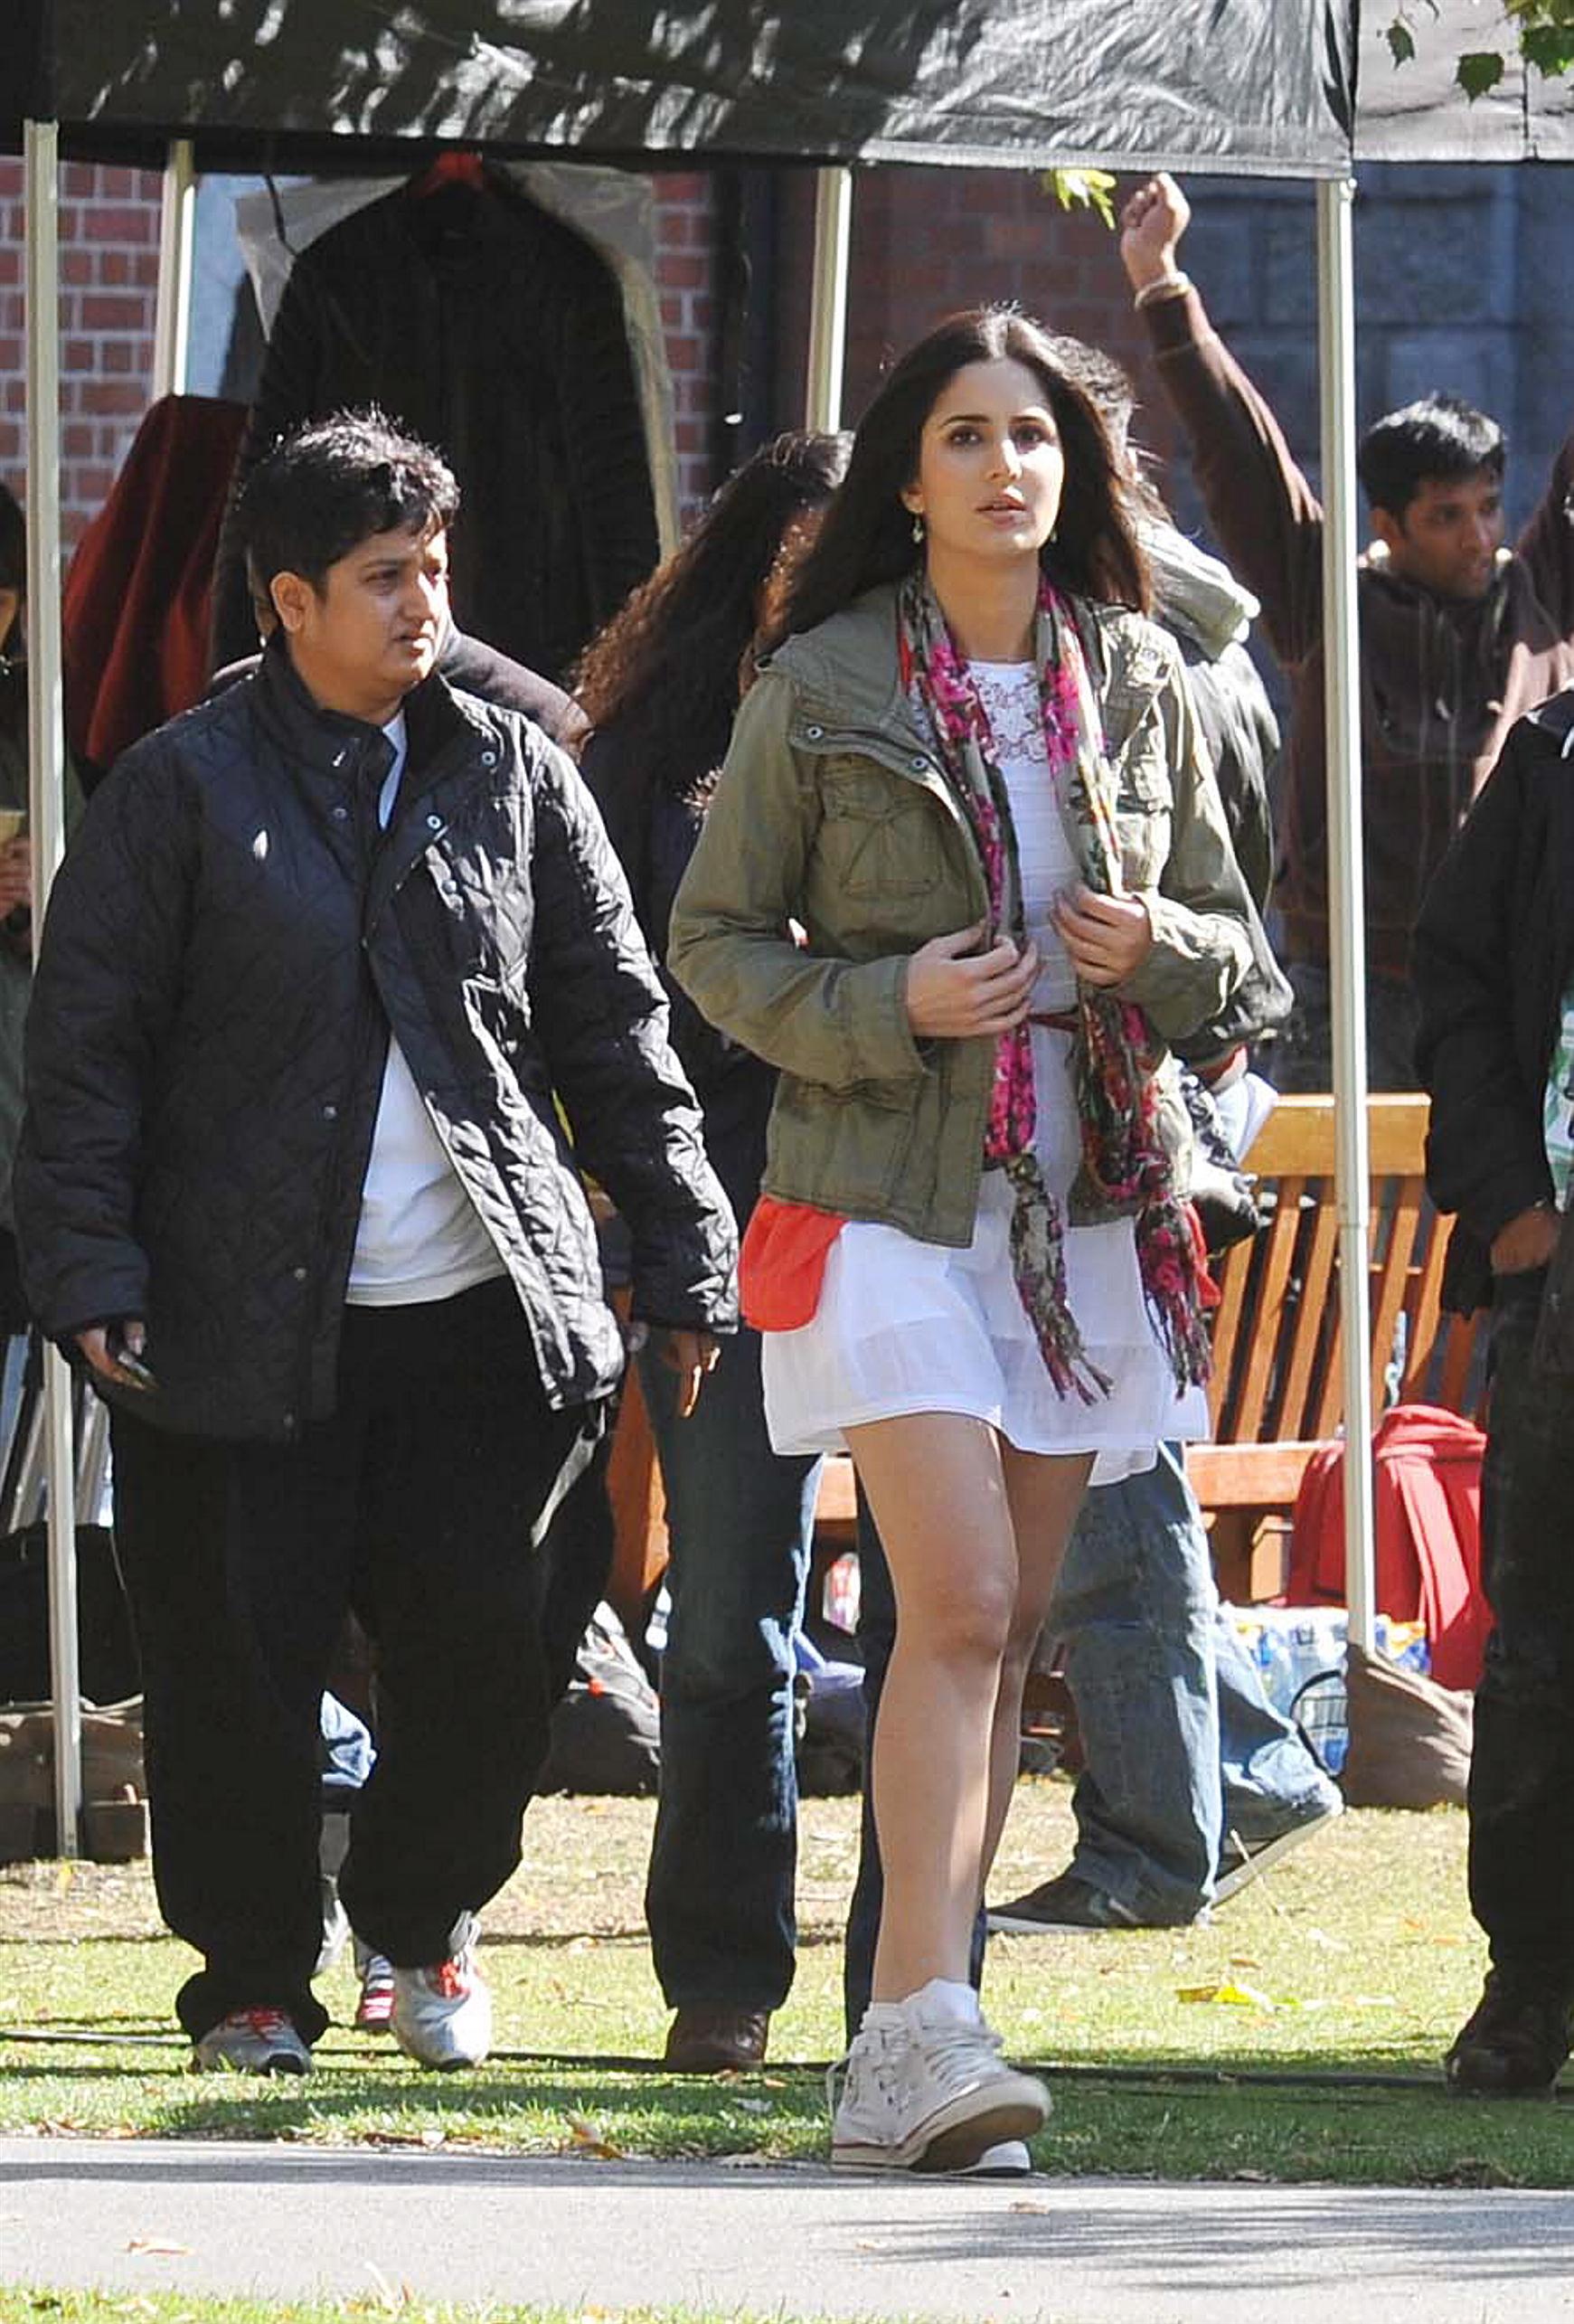 Salman Khan and Katrina Kaif in Ek Tha Tiger being shot on location at Trinity College Pictures | Picture 75340